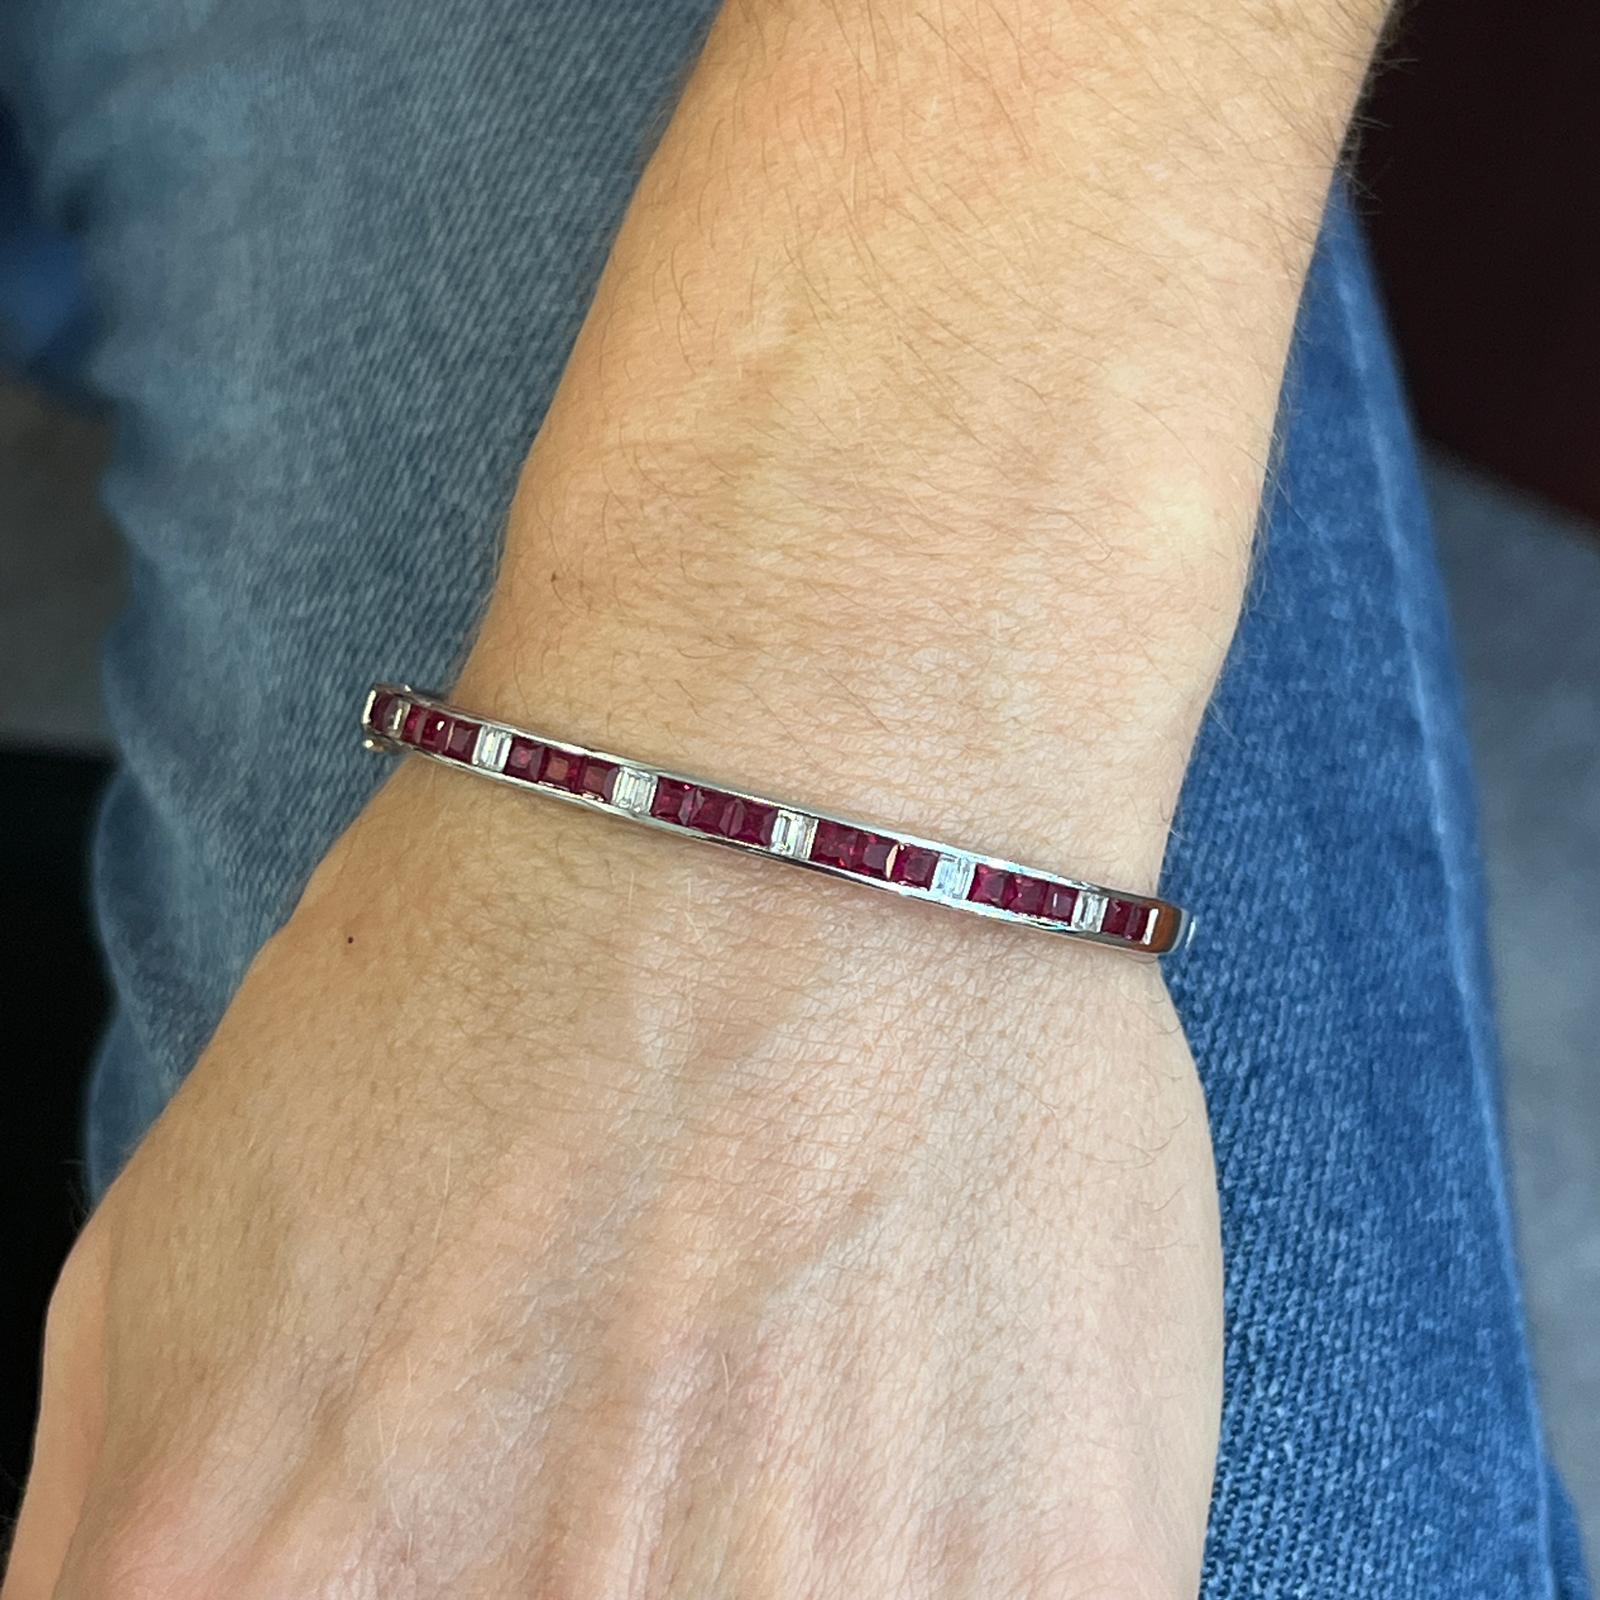 Ruby and diamond hinged bangle bracelet fashioned in 18 karat white gold. The bangle features natural square cut ruby gemstones weighing 2.98 carat total weight, and alternating with baguette cut diamonds weighing .45 carat total weight. The